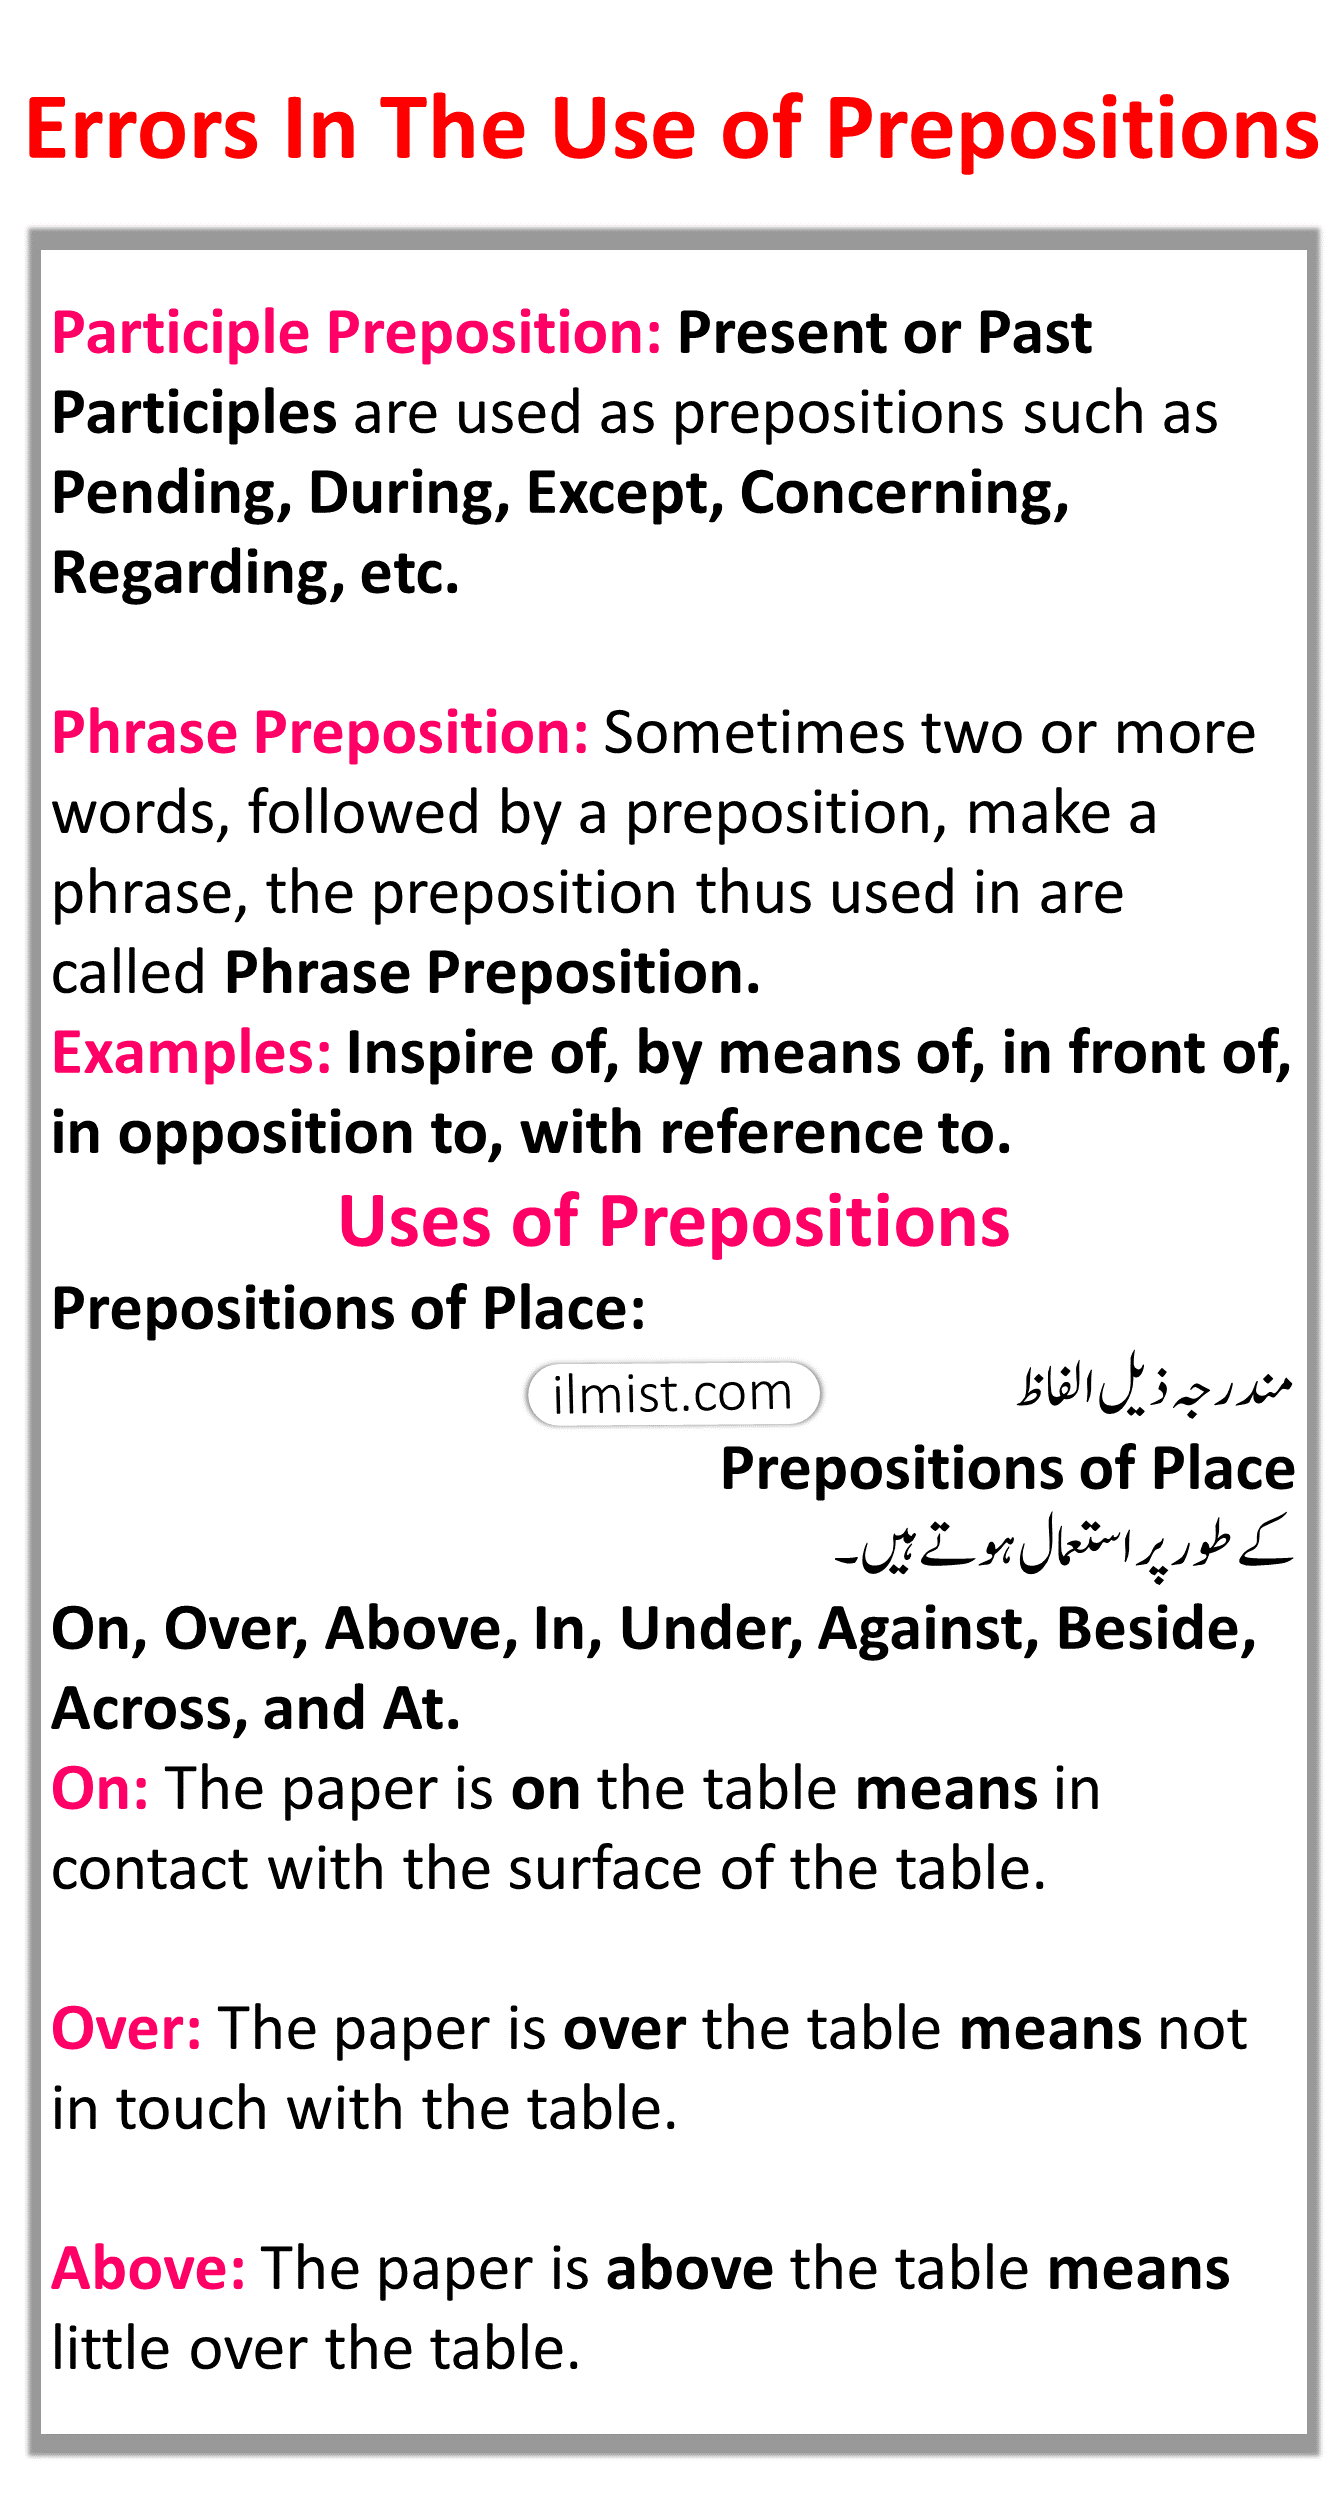 Preposition, Forms, Uses, and Examples In English To Urdu